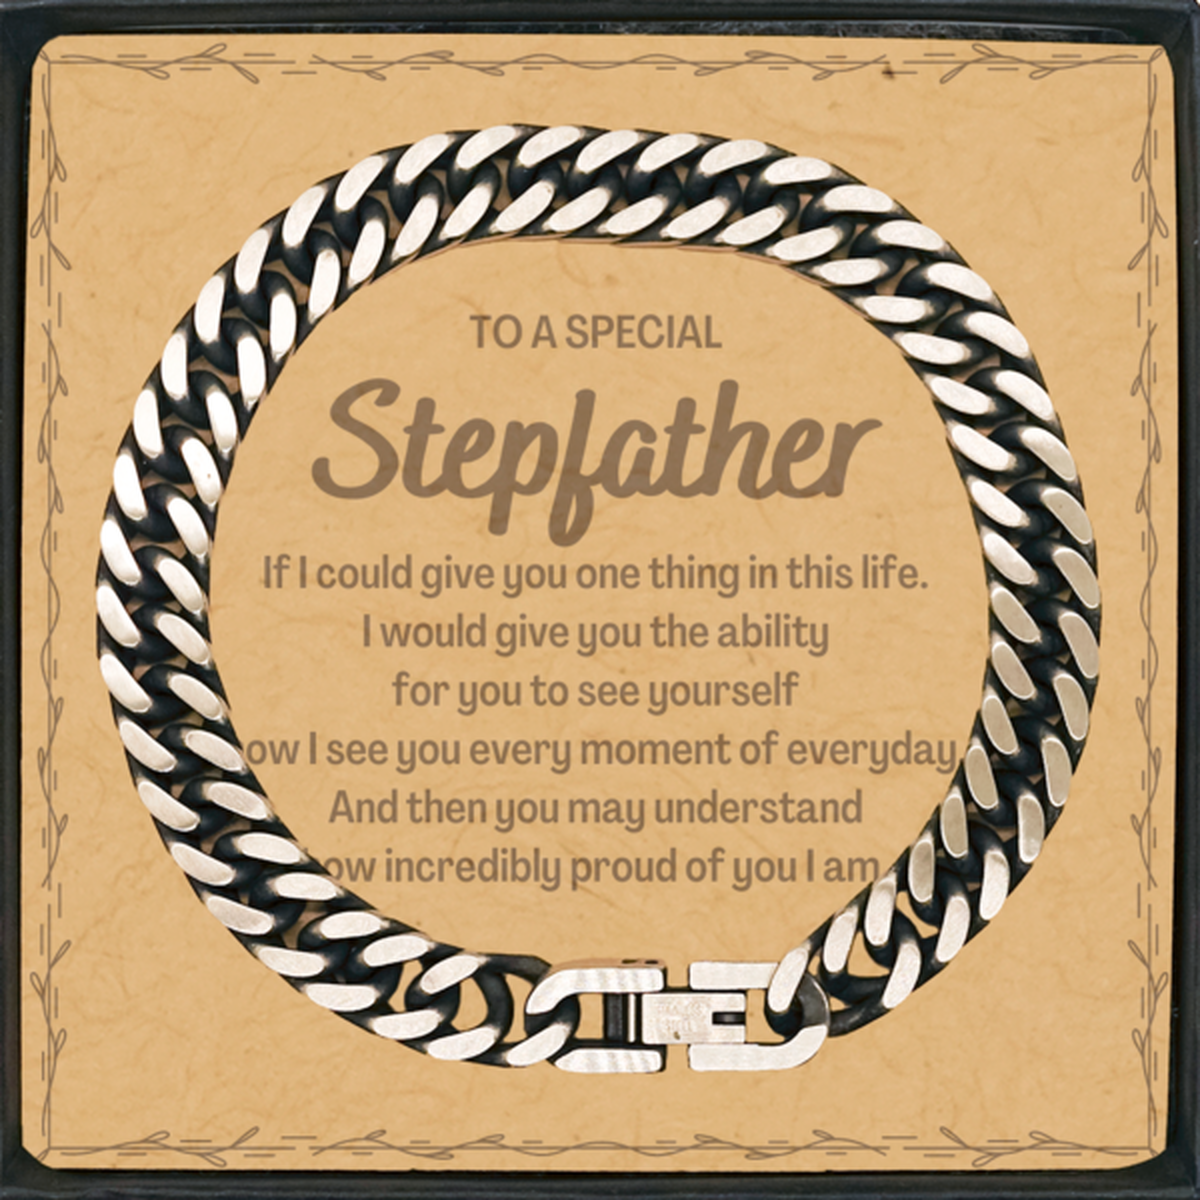 To My Stepfather Cuban Link Chain Bracelet, Gifts For Stepfather Message Card, Inspirational Gifts for Christmas Birthday, Epic Gifts for Stepfather To A Special Stepfather how incredibly proud of you I am